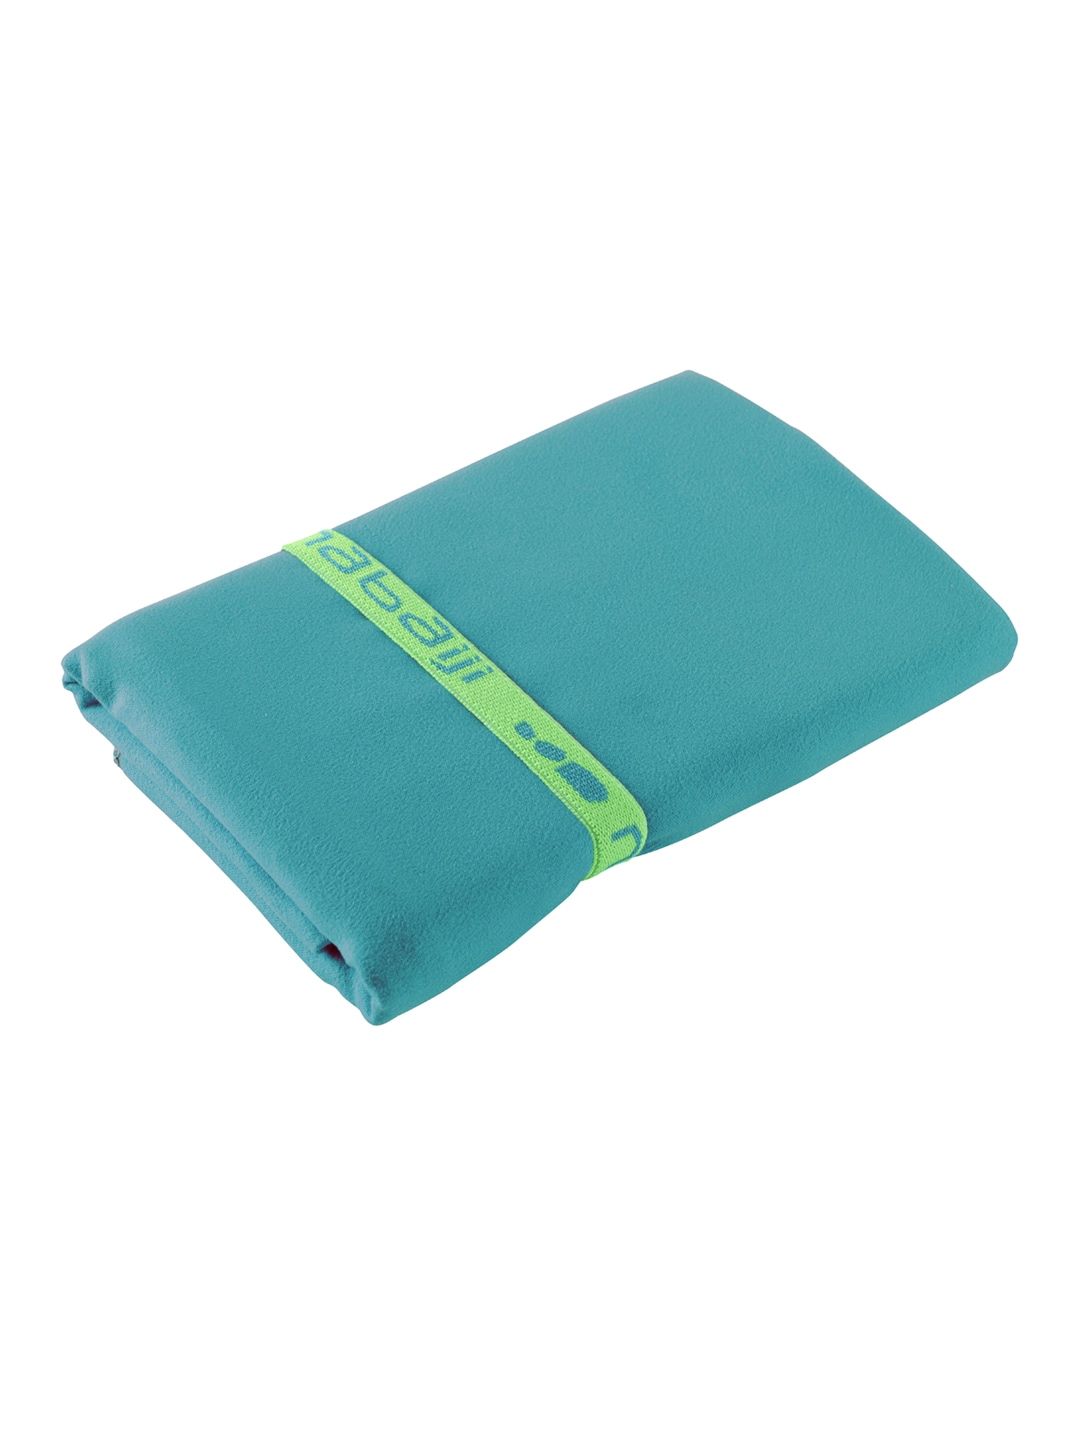 Nabaiji By Decathlon Adults Sea Green Solid 150 GSM Quick Dry Bath Towel Price in India